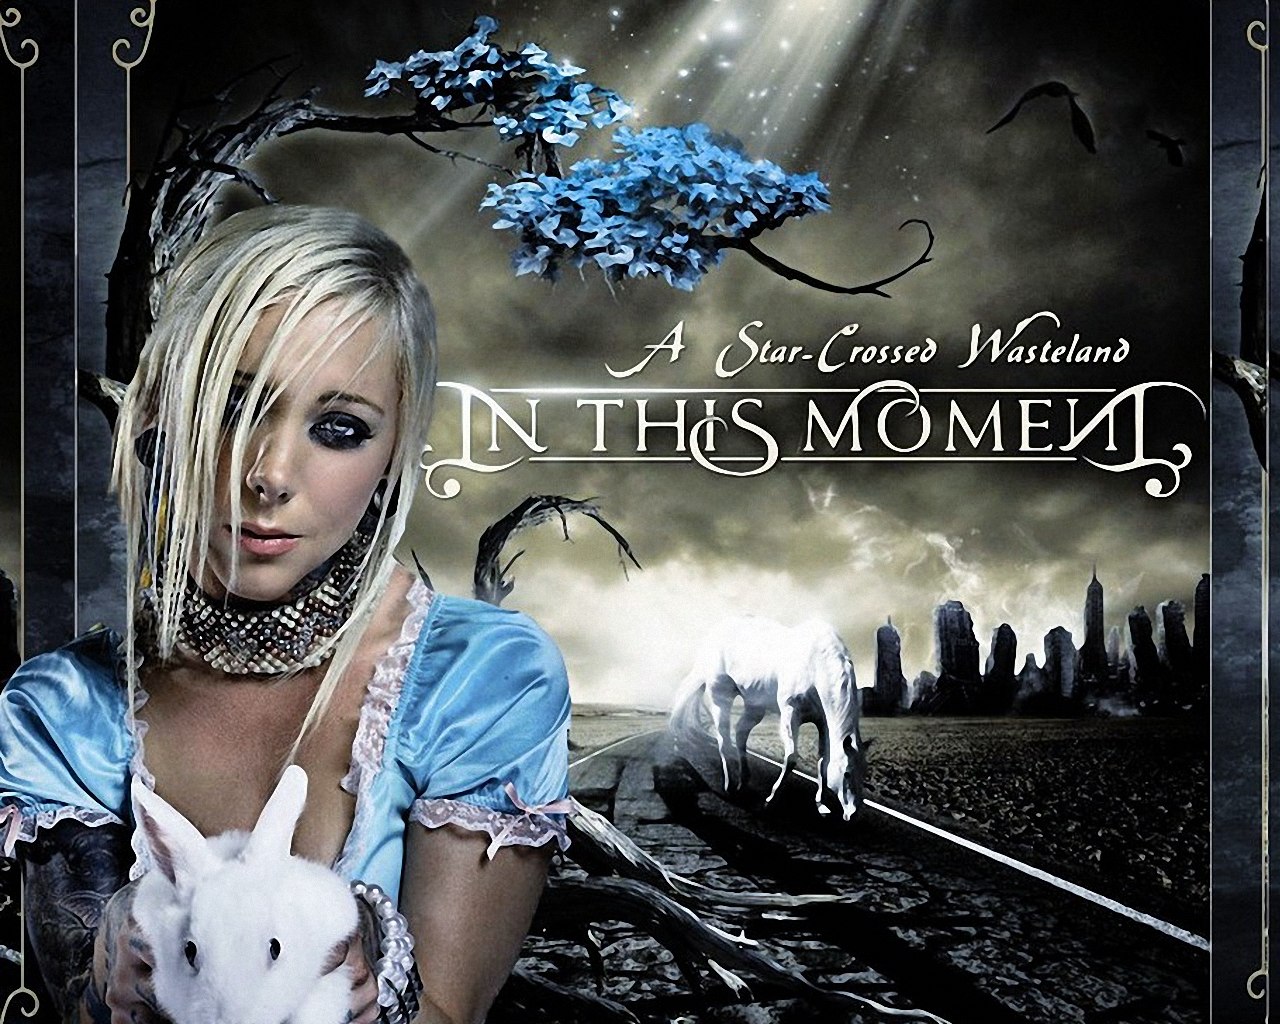 maria brink wallpapers,cg artwork,album cover,photography,movie,fictional character